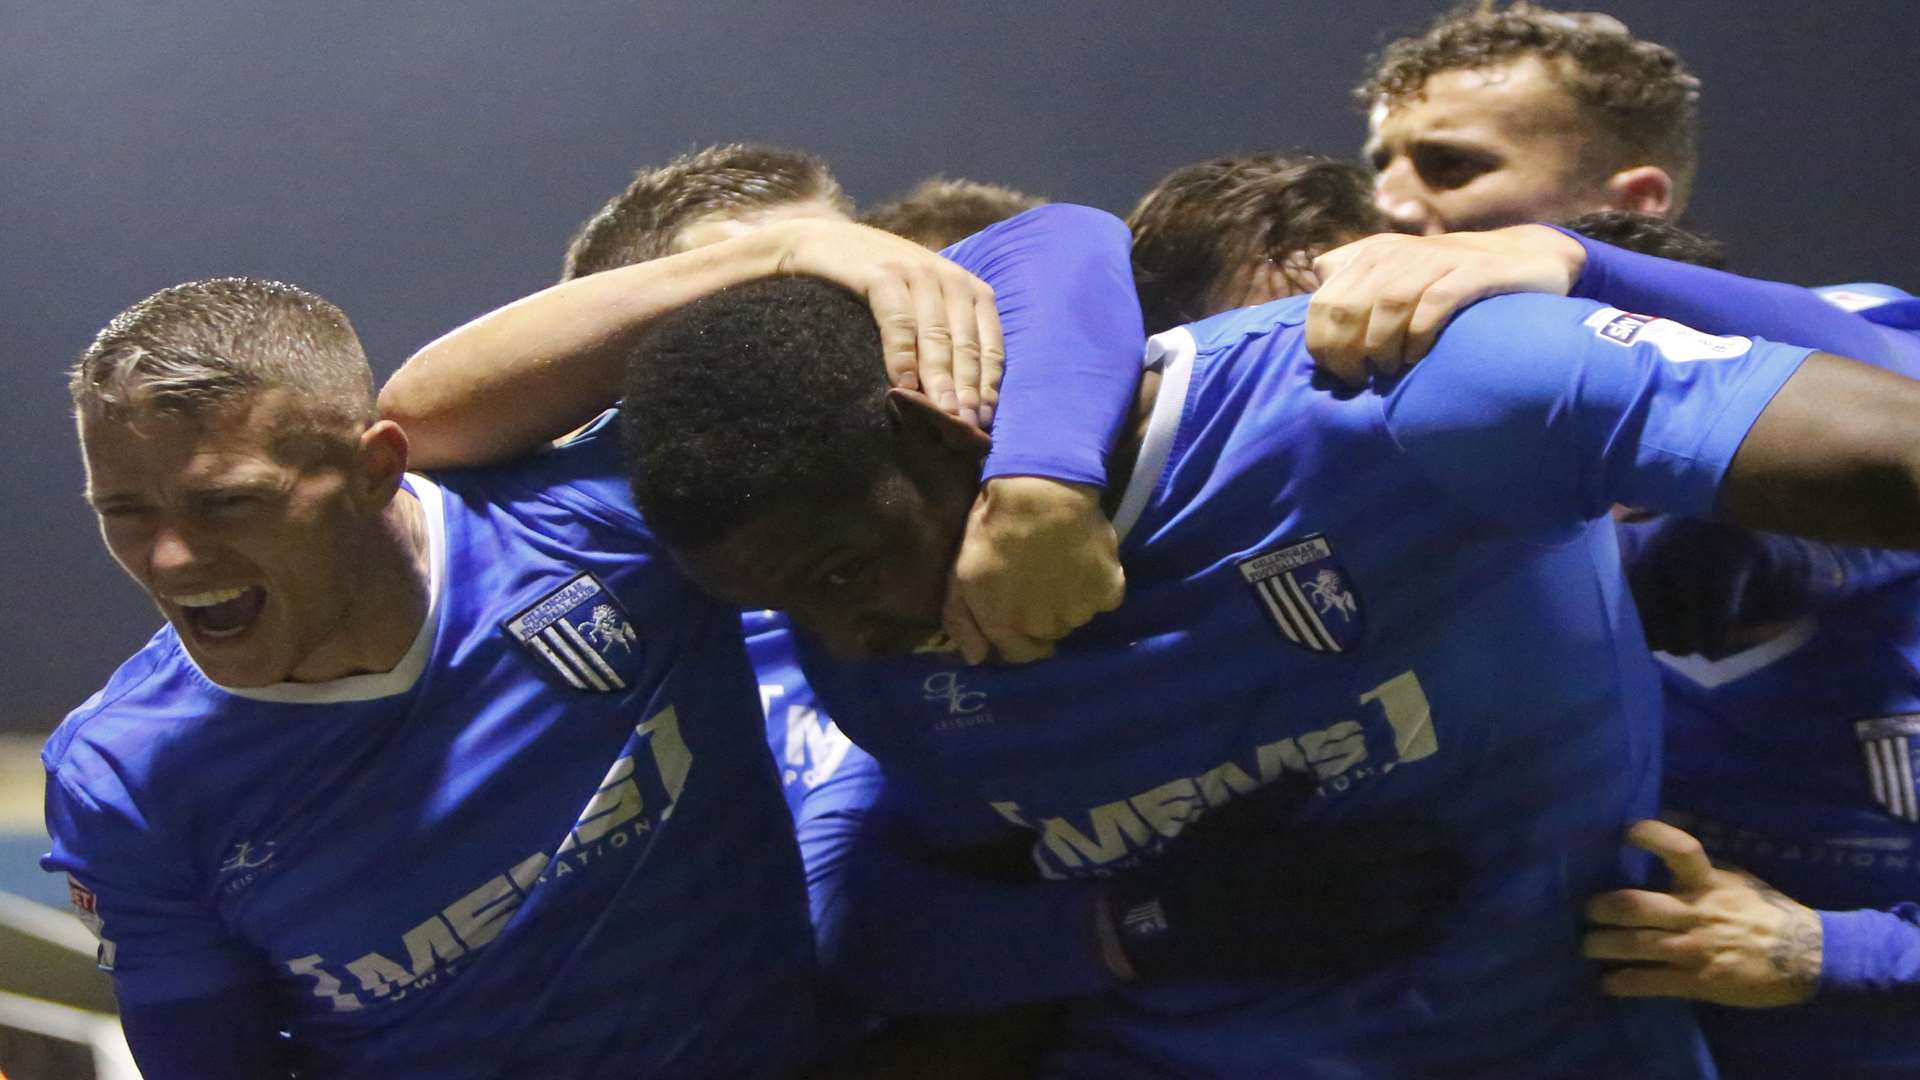 ...and is mobbed by relieved team-mates as Gills regain the winning feeling in League 1 at last Picture: Andy Jones